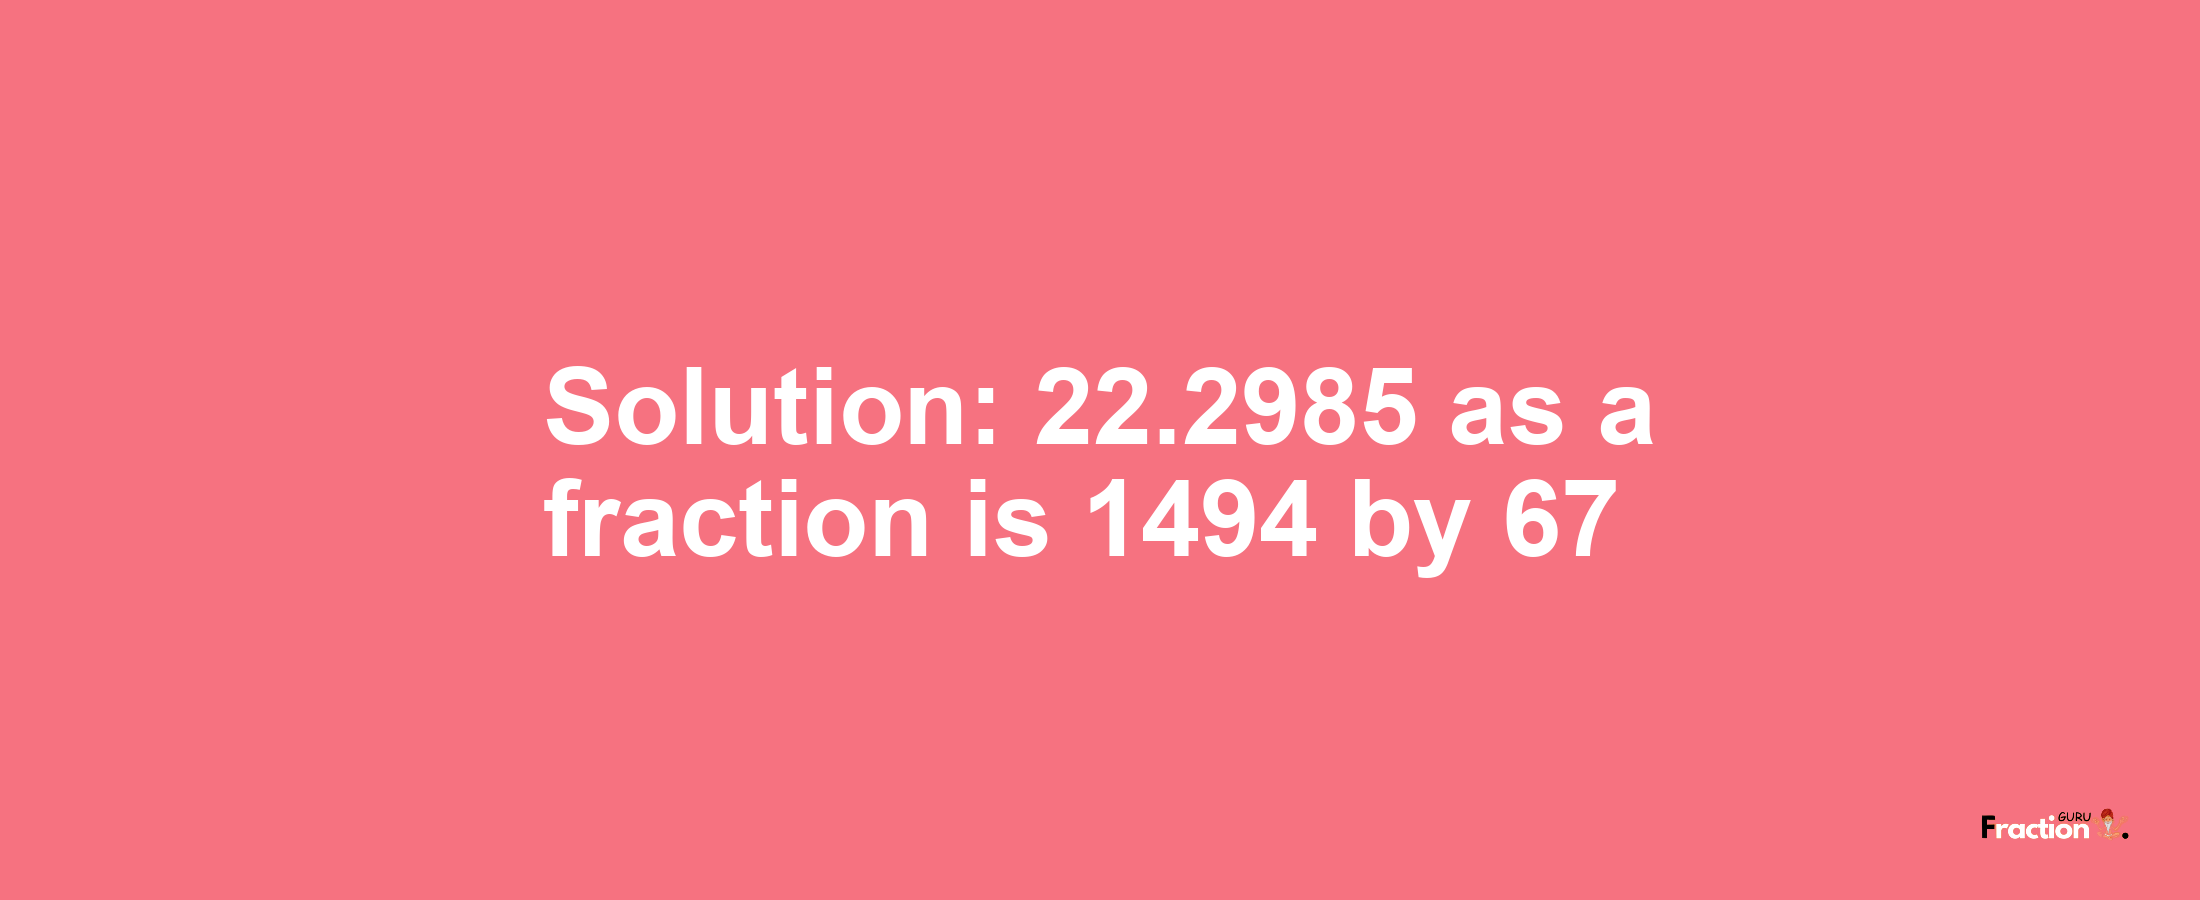 Solution:22.2985 as a fraction is 1494/67